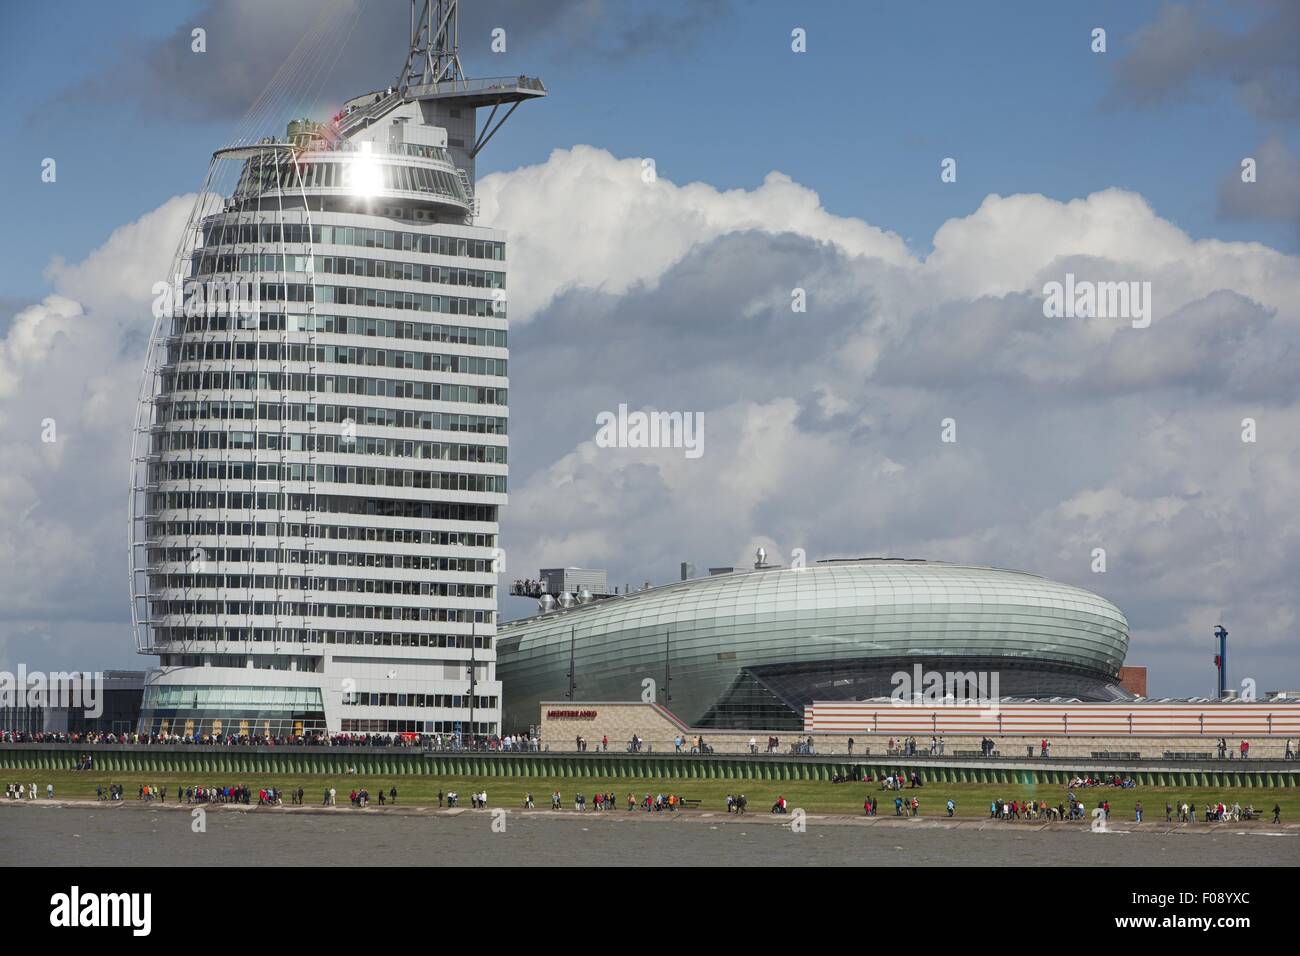 Exterior view of Atlantic Hotel Sail City at HafenCity in Bremerhaven, Bremen, Germany Stock Photo